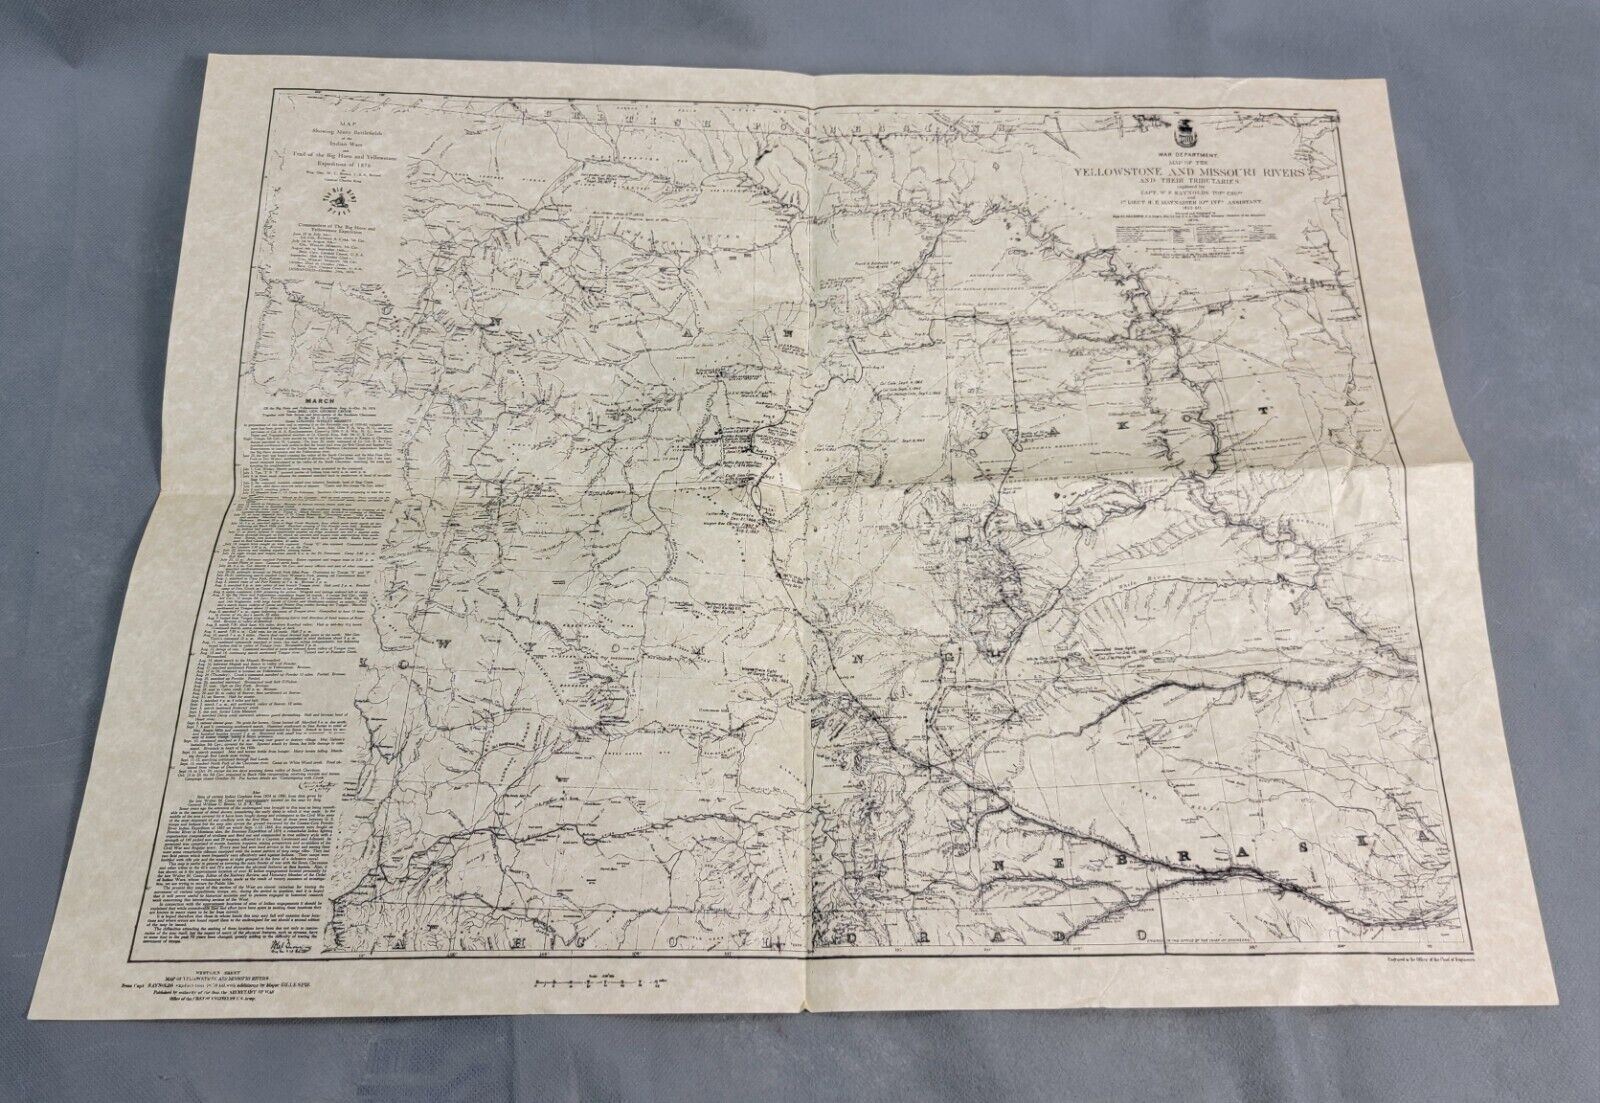 WAR DEPARTMENT MAP OF YELLOWSTONE & MISSOURI RIVERS Expedition of 1876 MAP